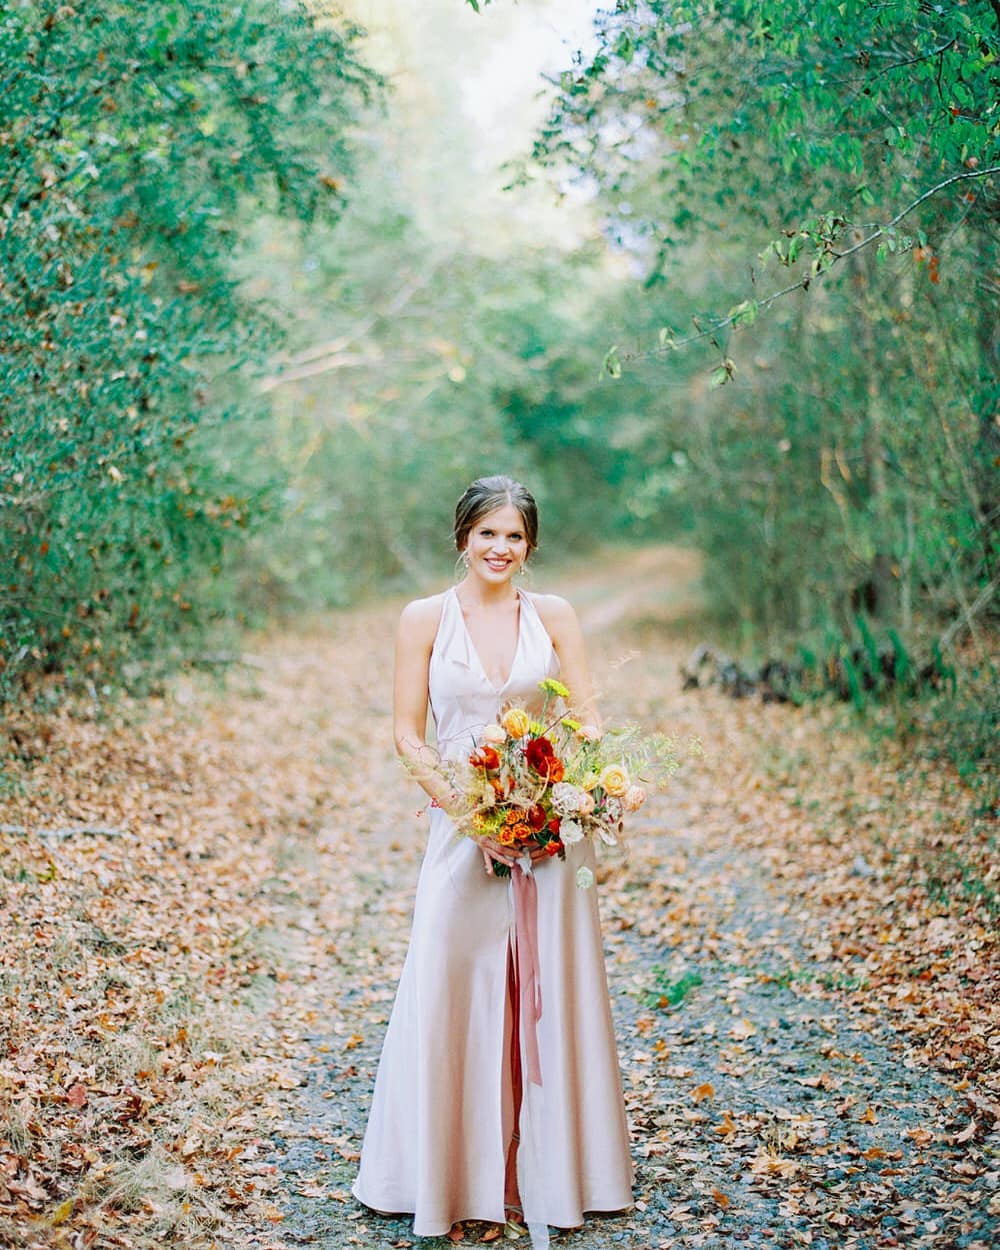 Silk apricot wedding dress with a wild fall bouquet and trailing ribbon; Photo by Brian D Smith Photography with planning + design by Willow and Oak Events